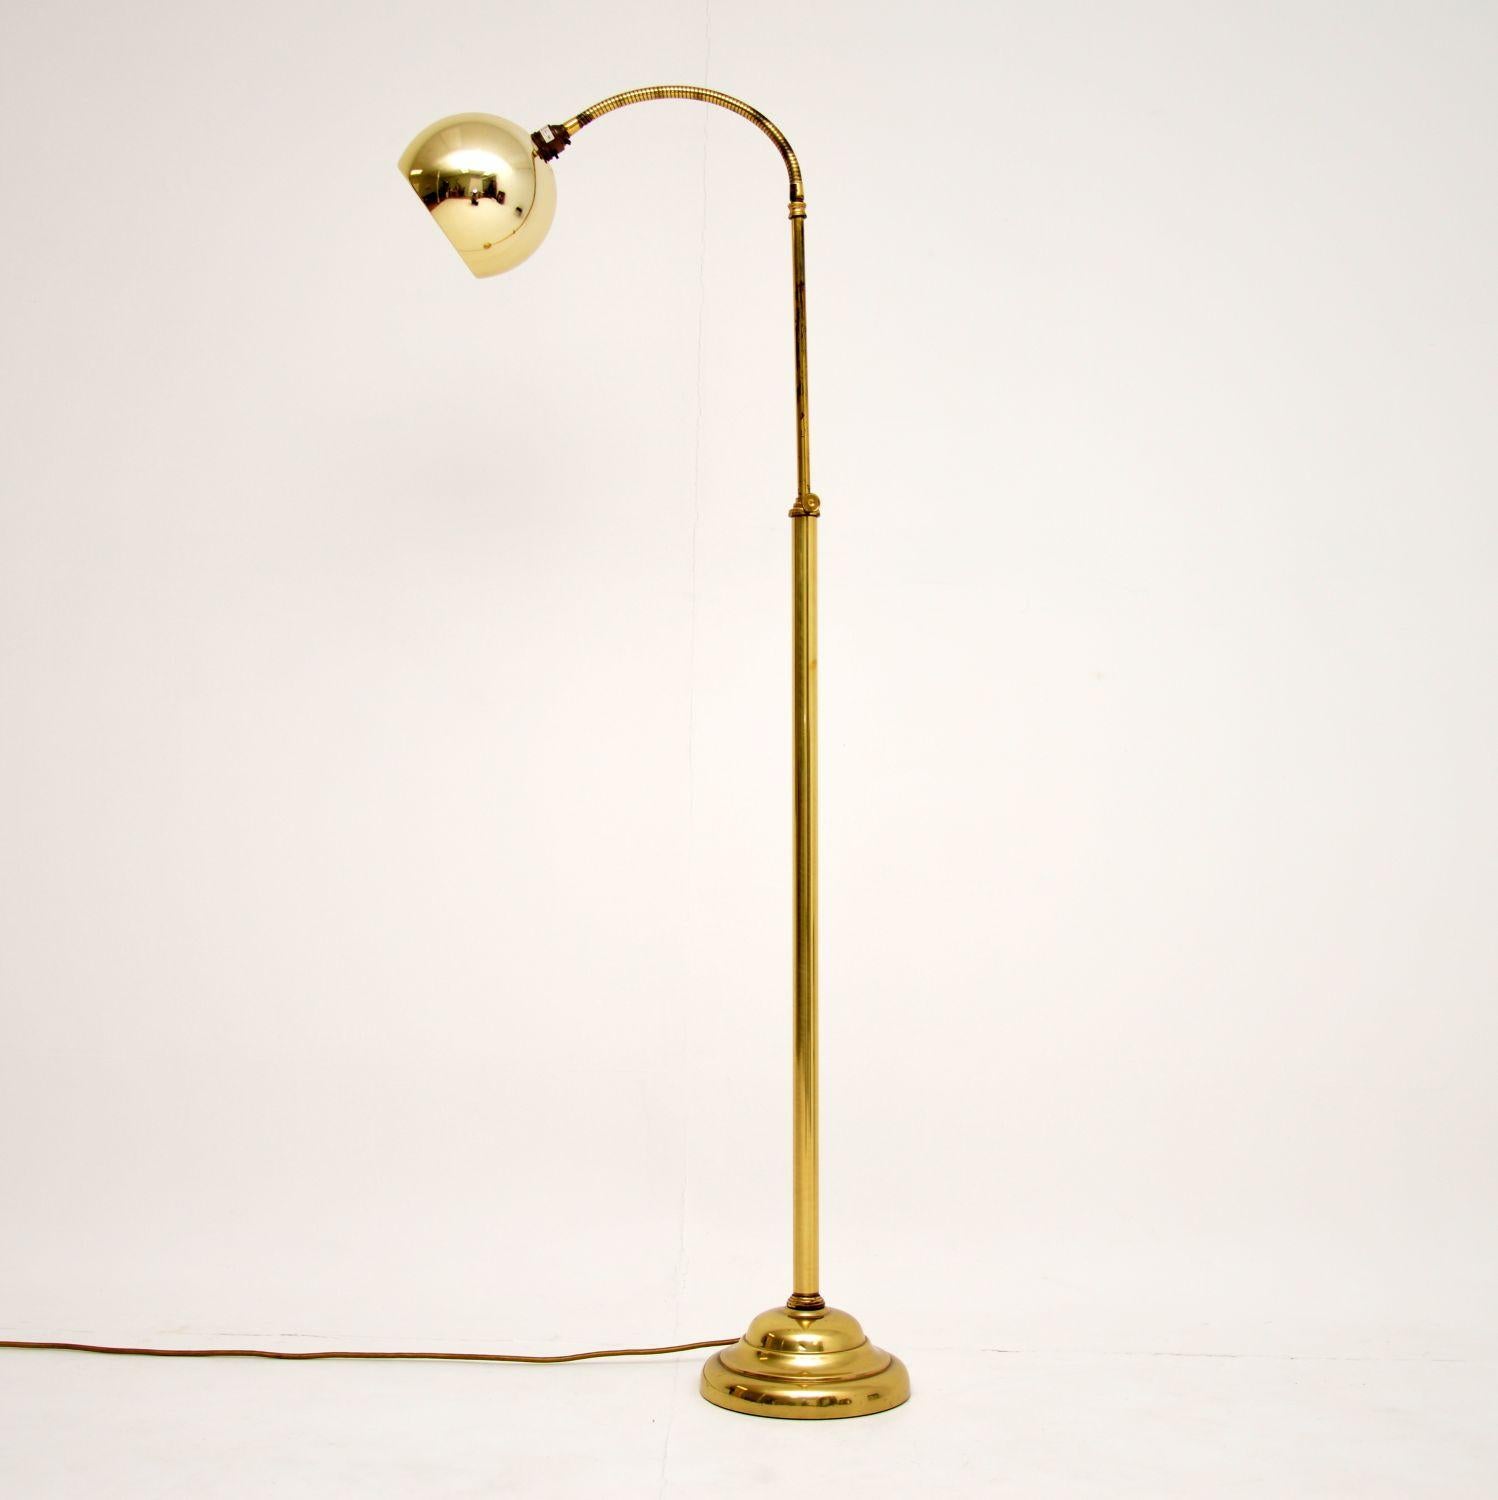 A stylish and very well made vintage brass lamp from the 1970s. This is adjustable, the height can be raised and lowered as seen. The flexible neck also allows for the angle of light to be adjusted to whichever way needed. This is in excellent